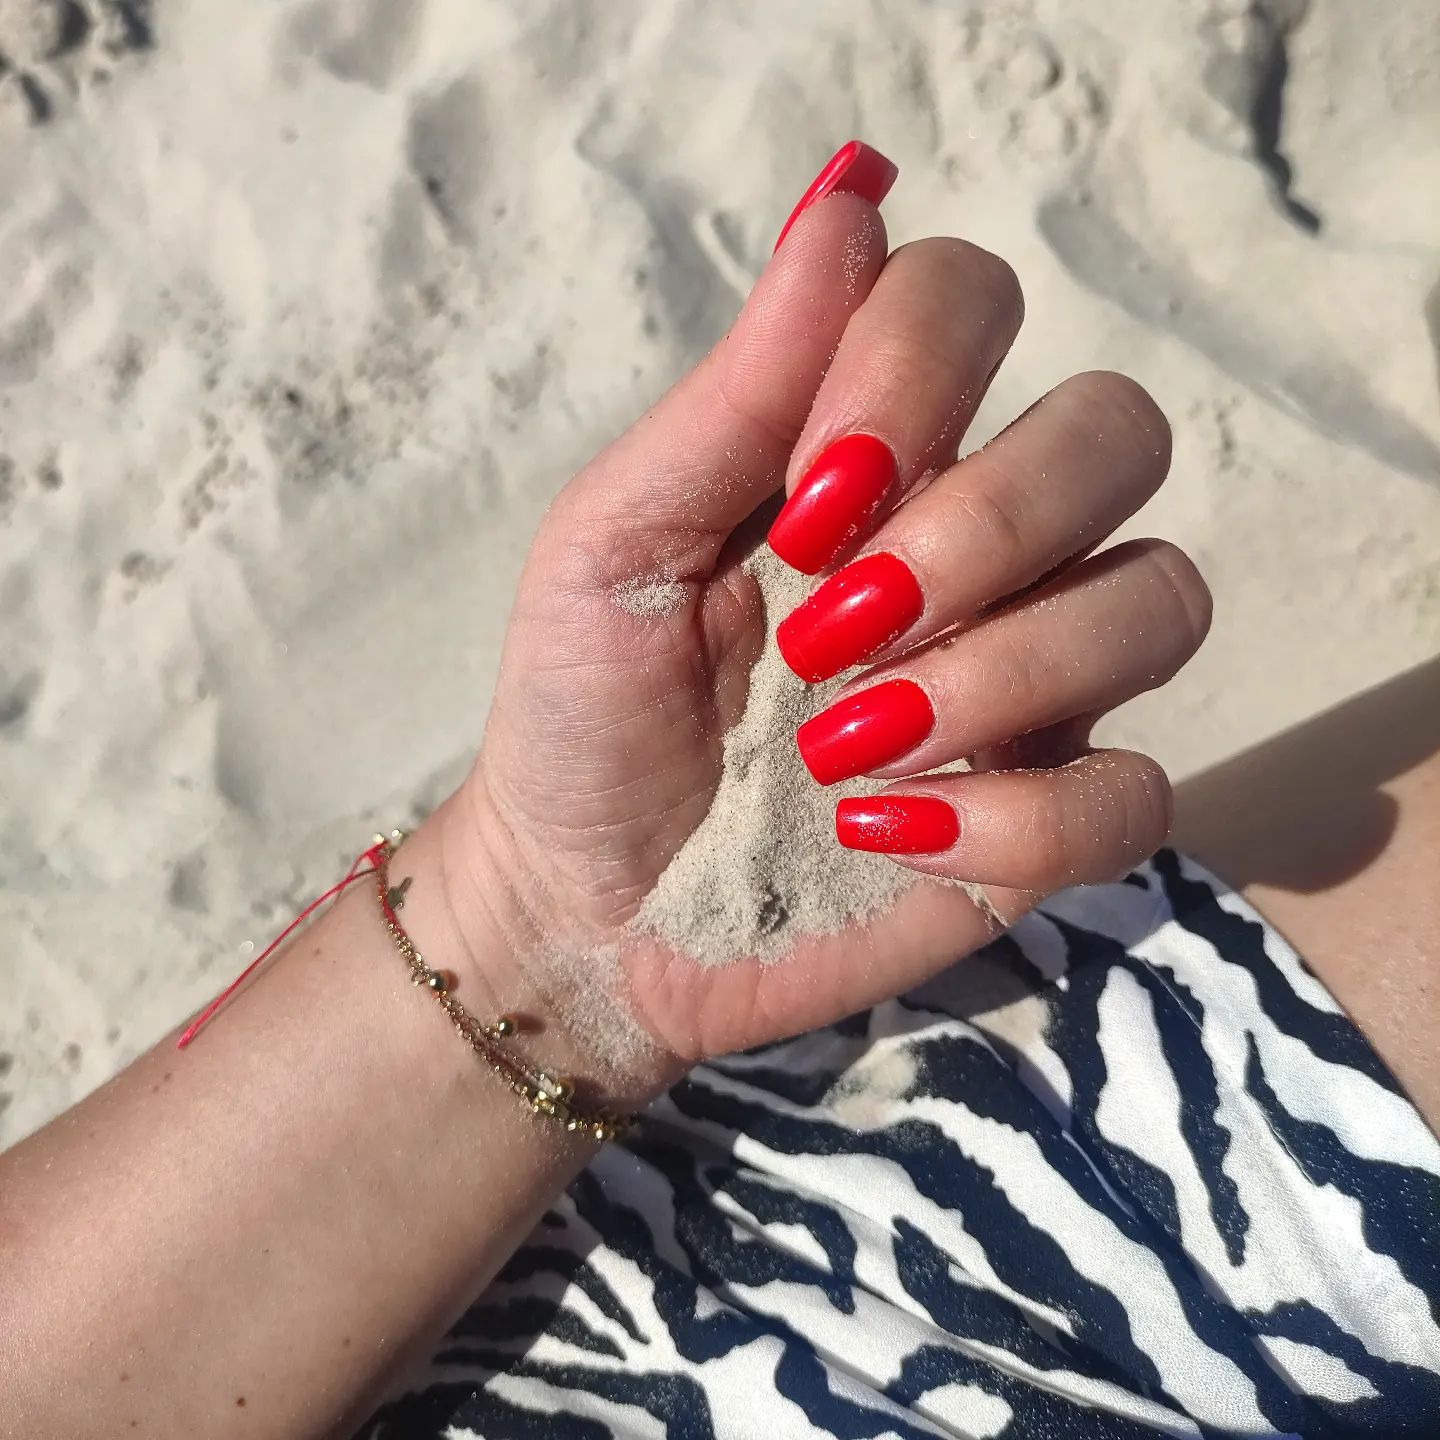  Red nails are always a good choice, especially for summertime. Your bright and super shiny nails are always one of favorites.